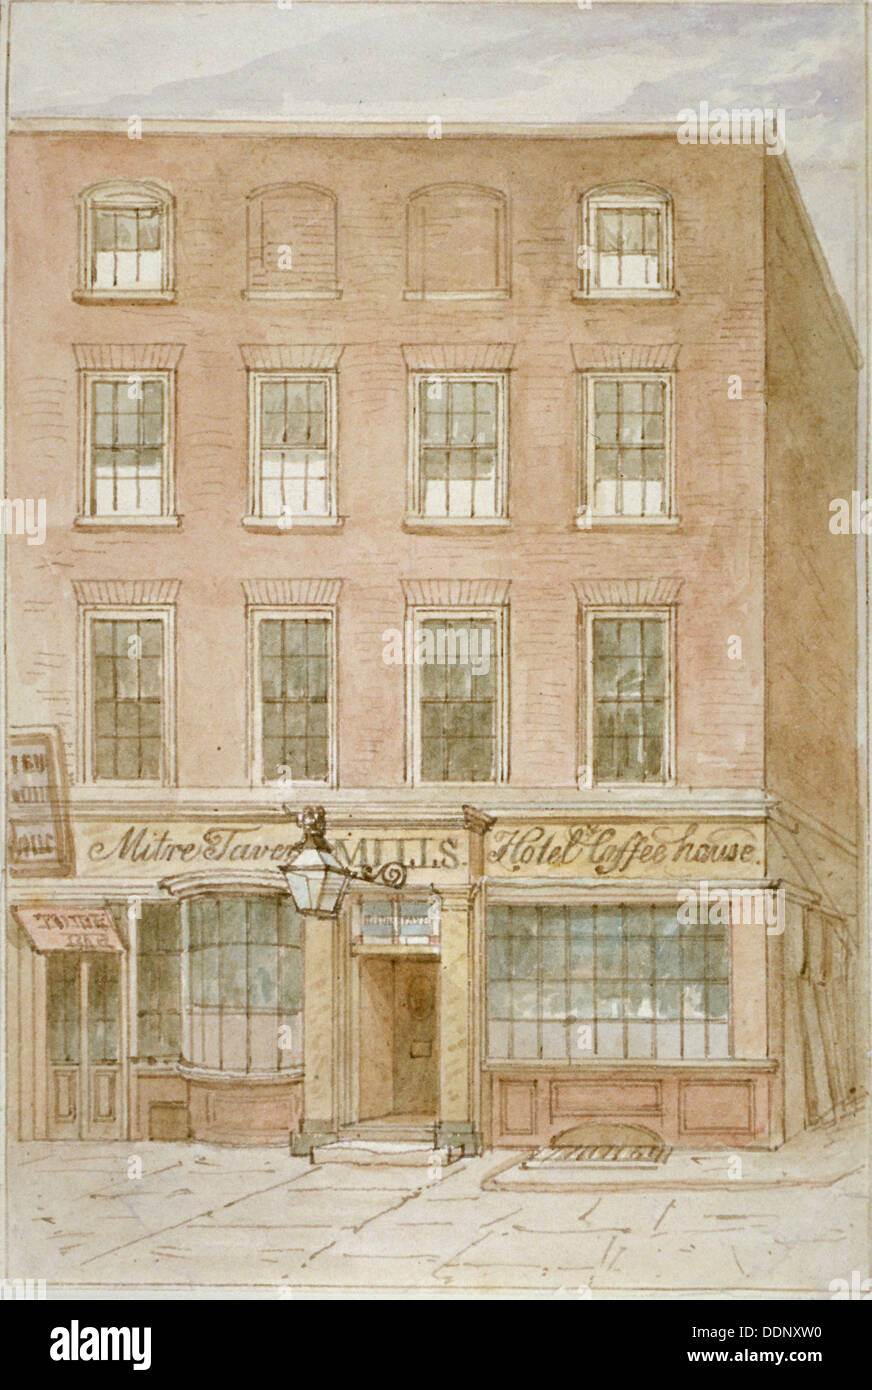 The Mitre Tavern, coffee house and hotel on Mitre Court, Fleet Street, City of London, 1850. Artist: James Findlay Stock Photo